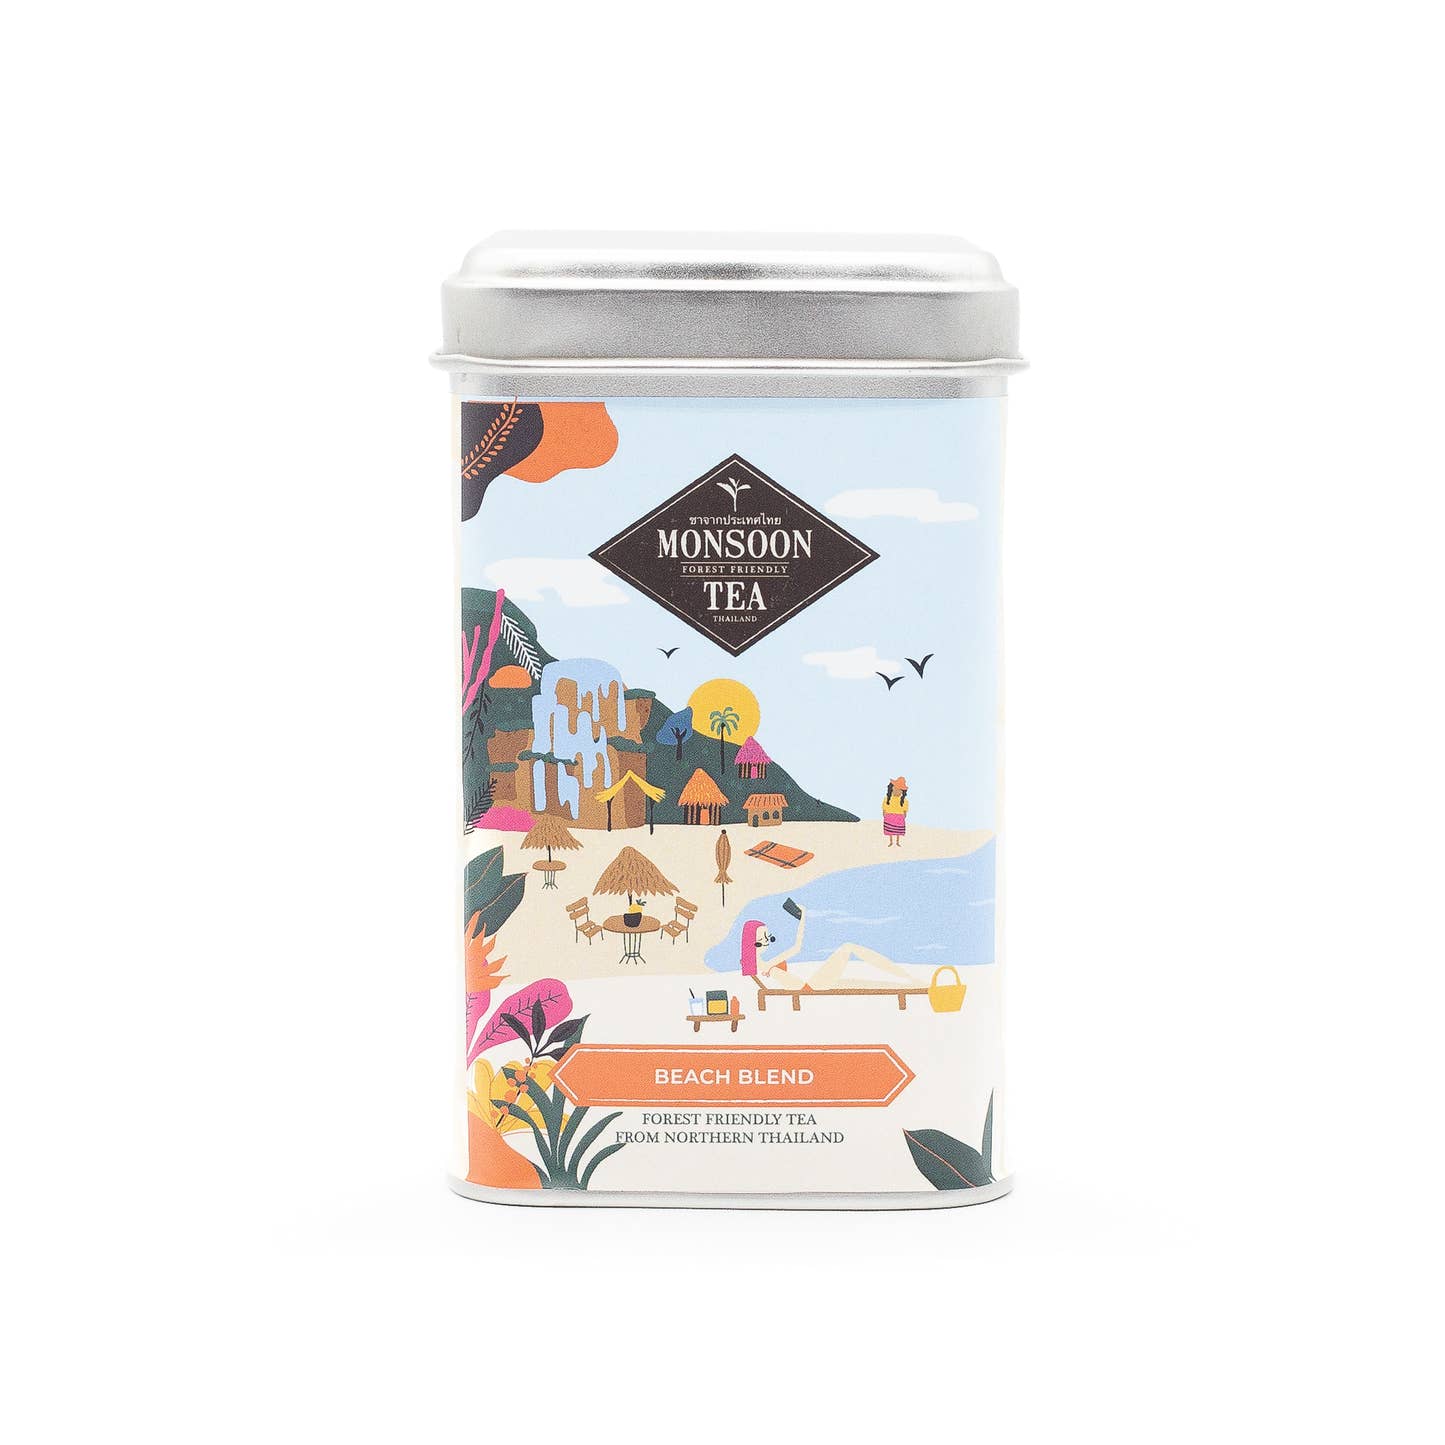 Beach Blend by Monsoon Tea loose leaf tea tin with picture of beach scene in Thailand